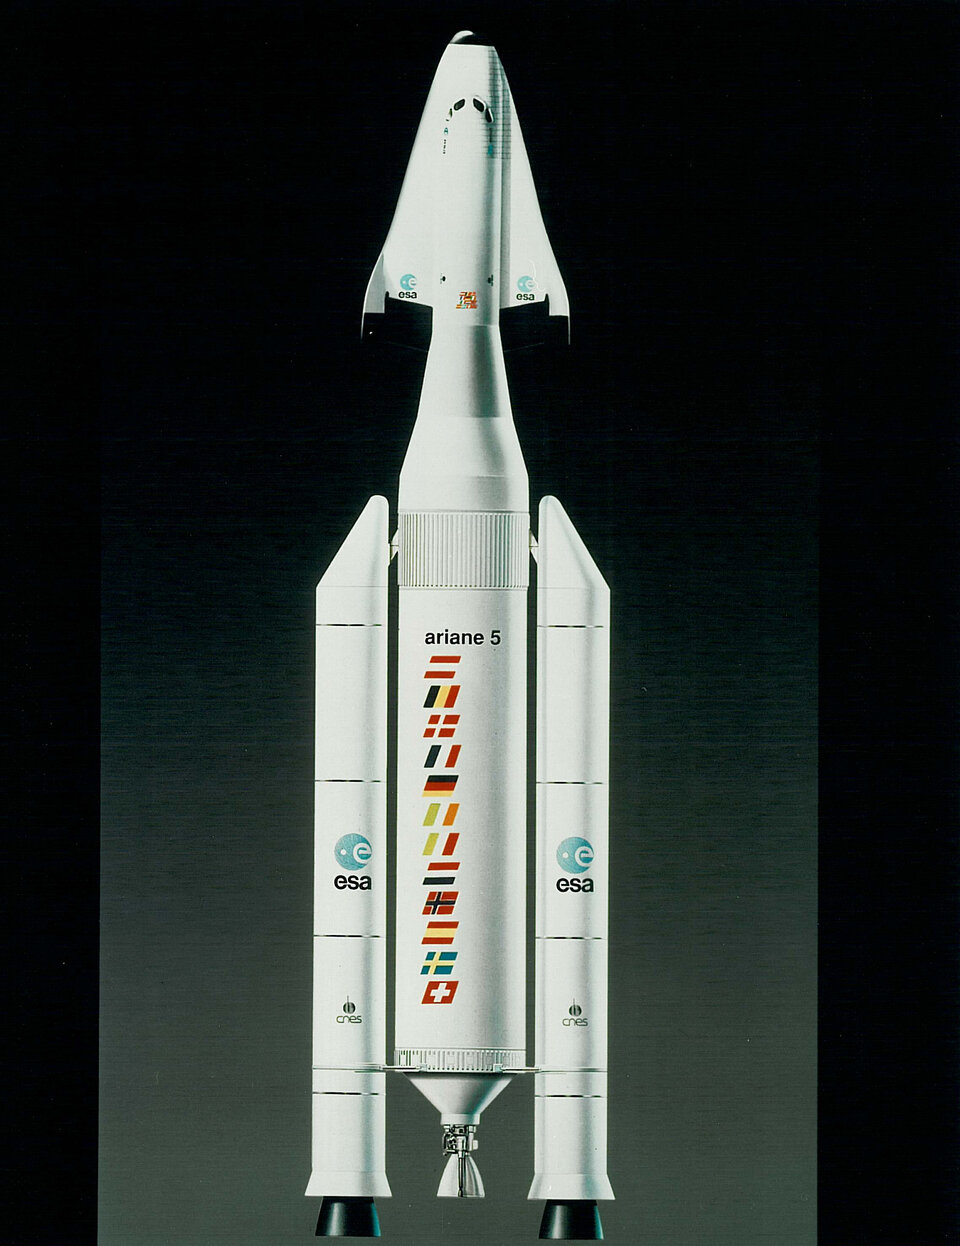 Ariane 5 in Hermes configuration, 1991